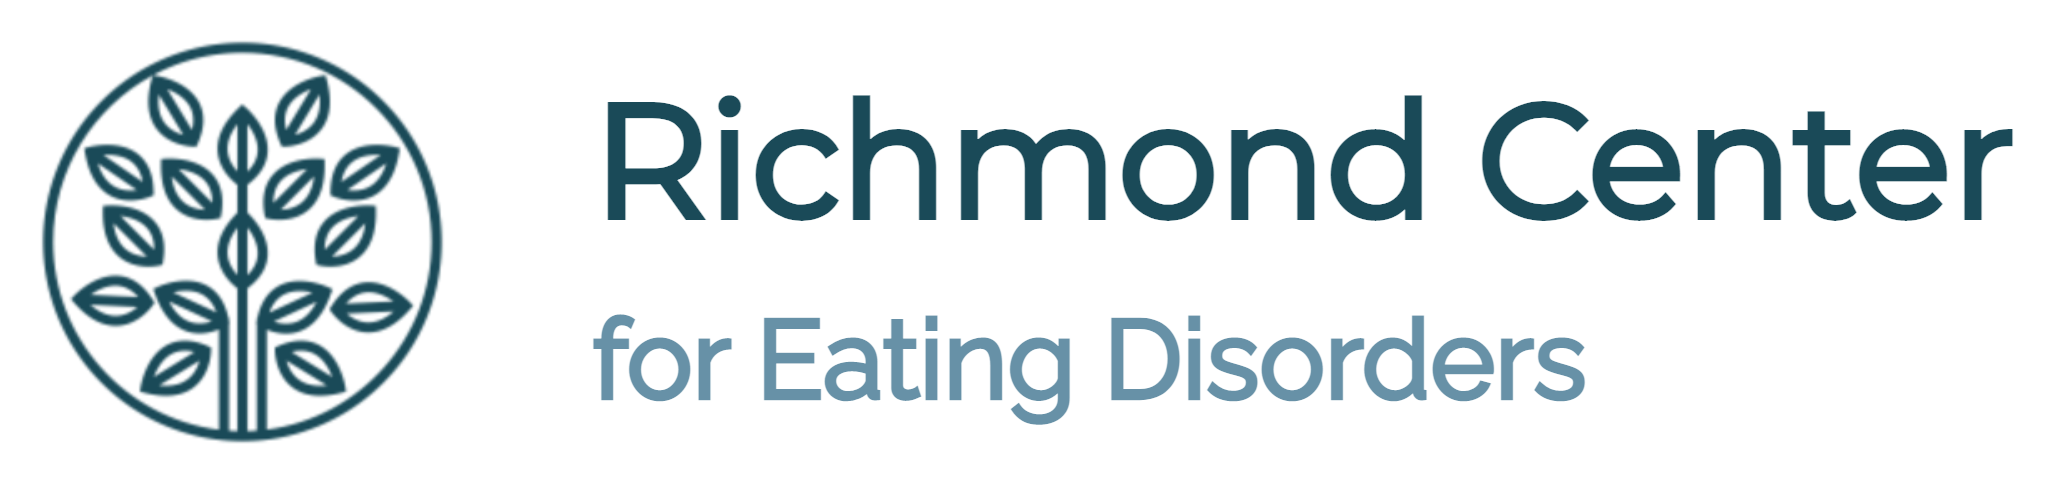 Richmond Center for Eating Disorders